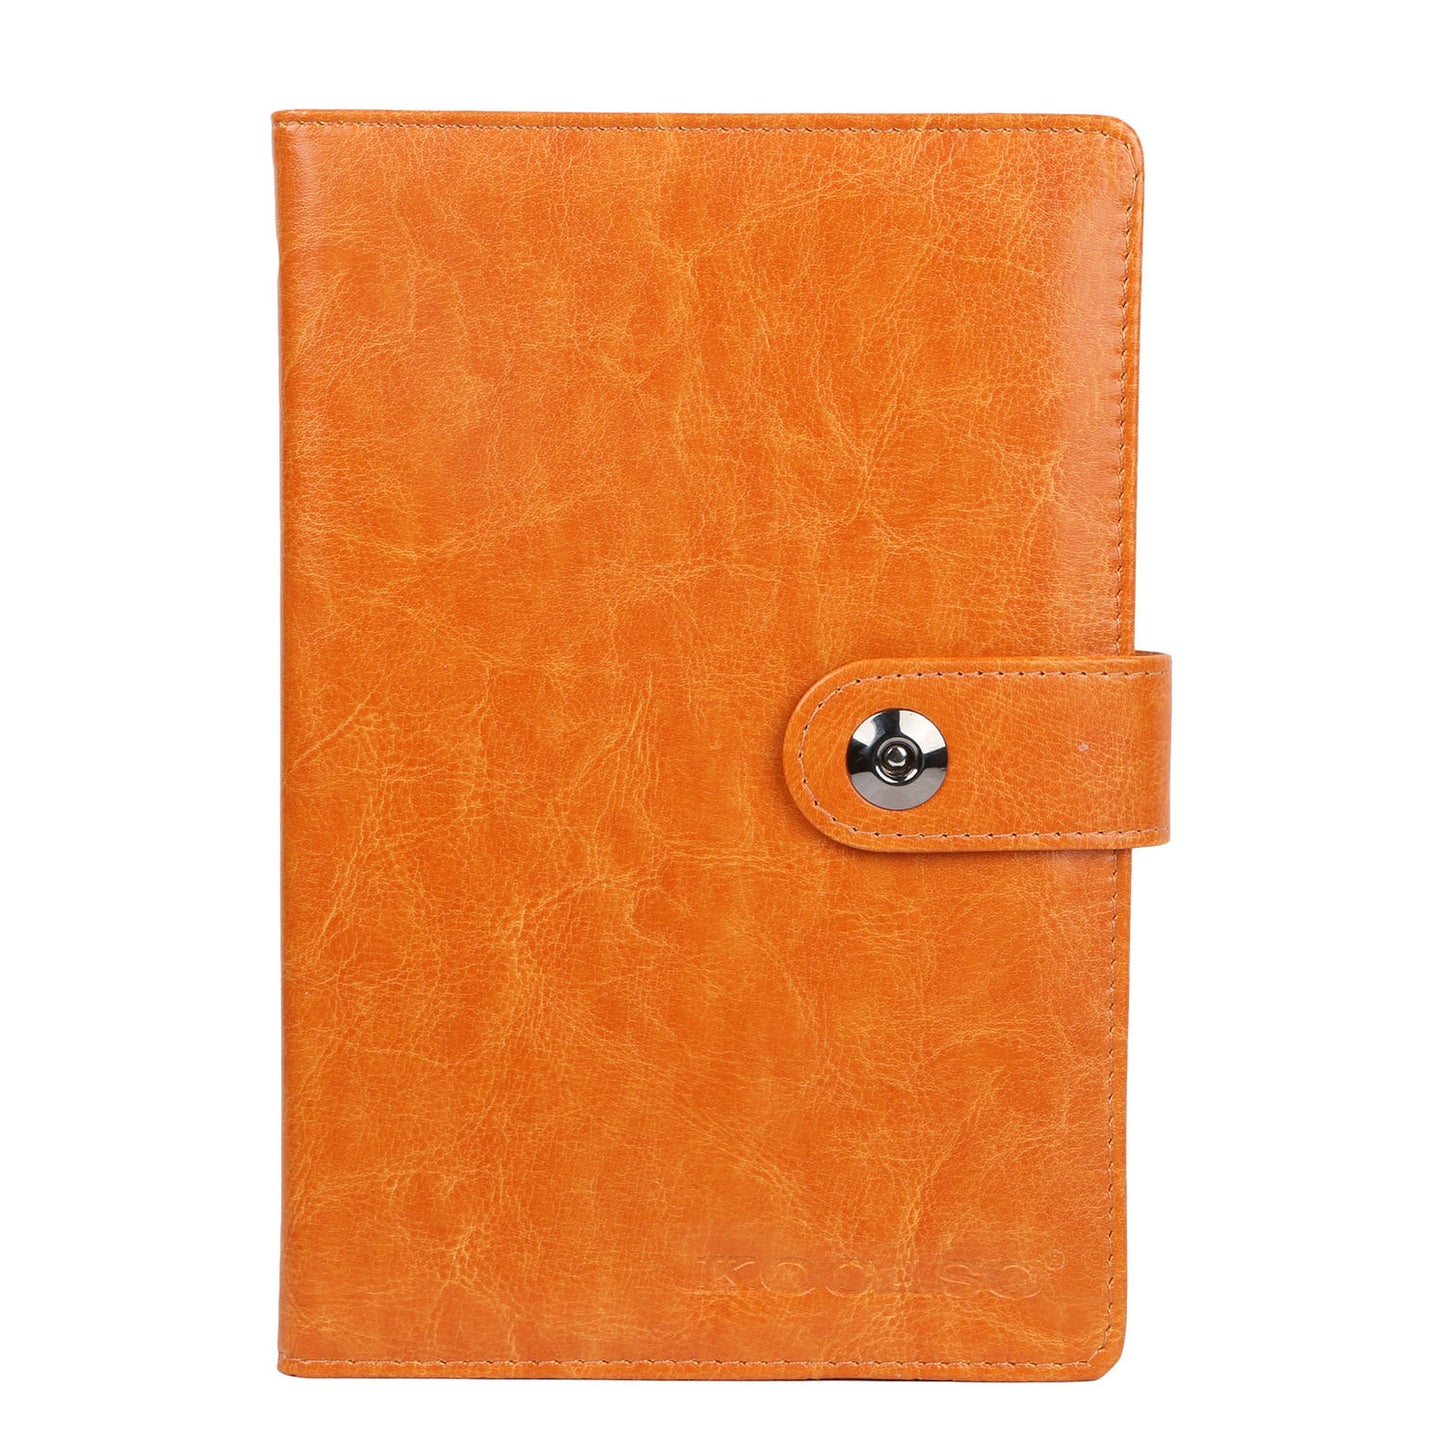 PU Leather Cover Notebook Memopad with Calendar World Map and Silk Ribbon